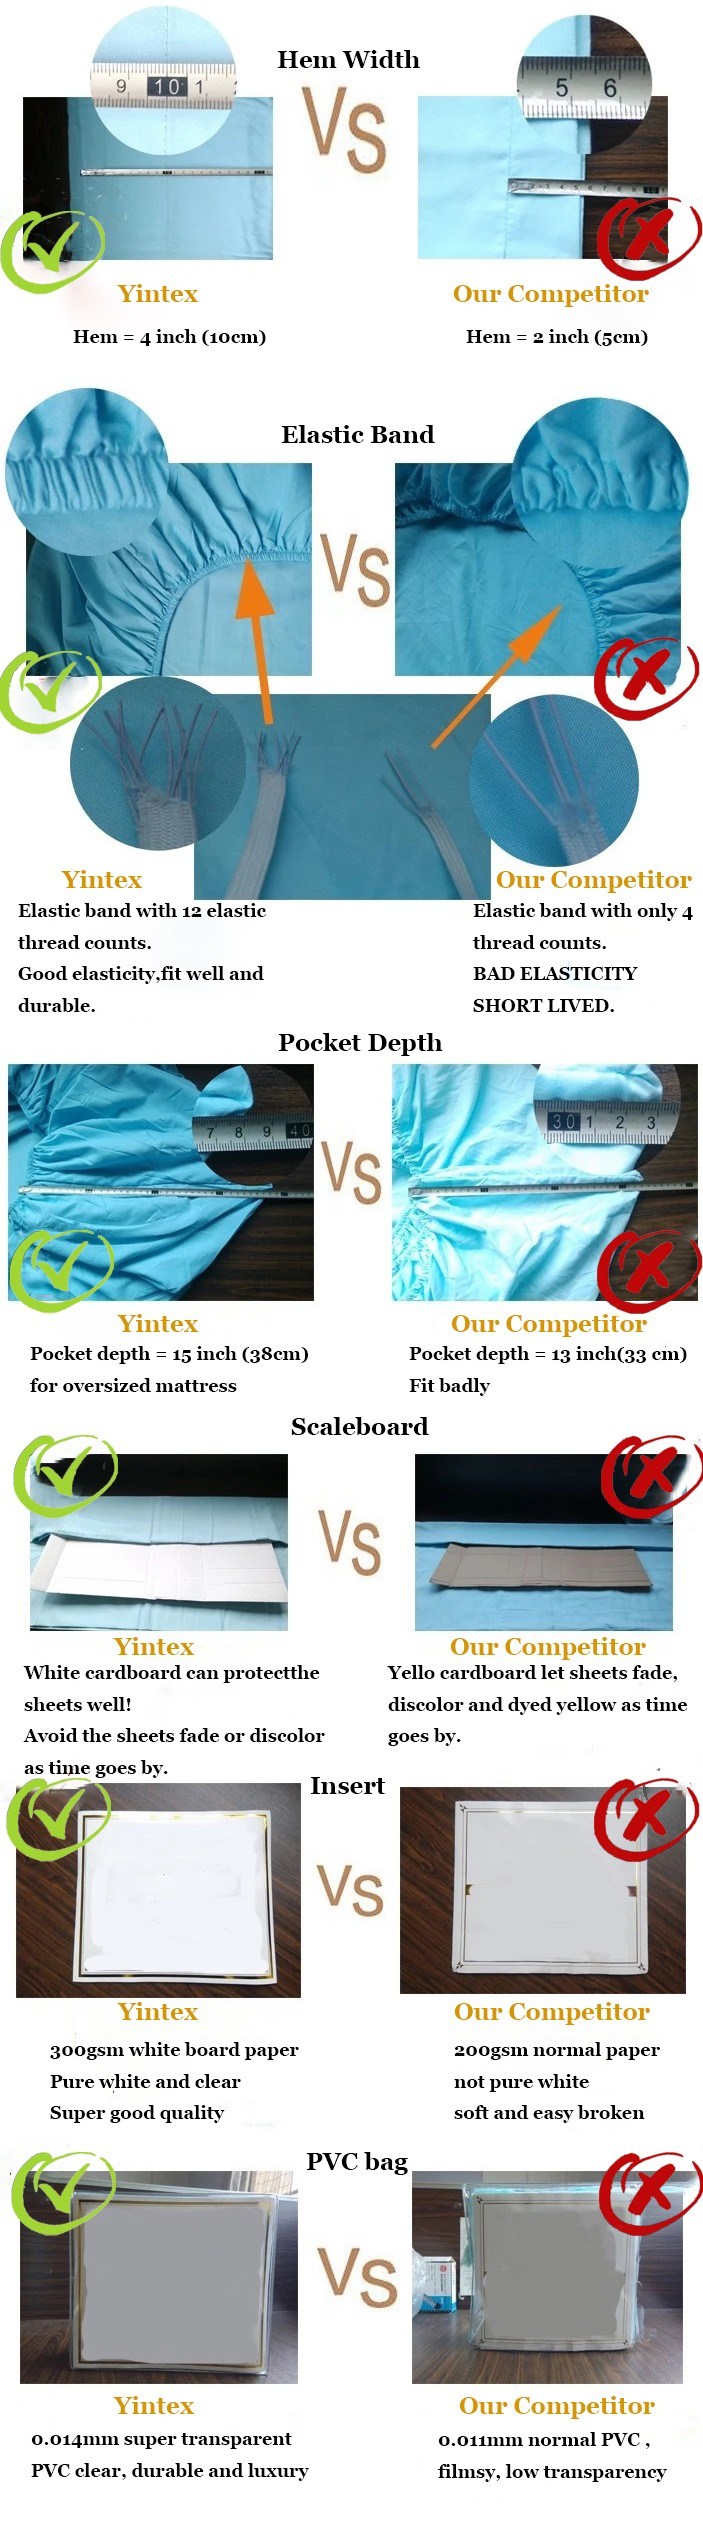 Disposable Comfortable Hotel Linen, Hotel Bed Sheets, Hotel Bedding Set